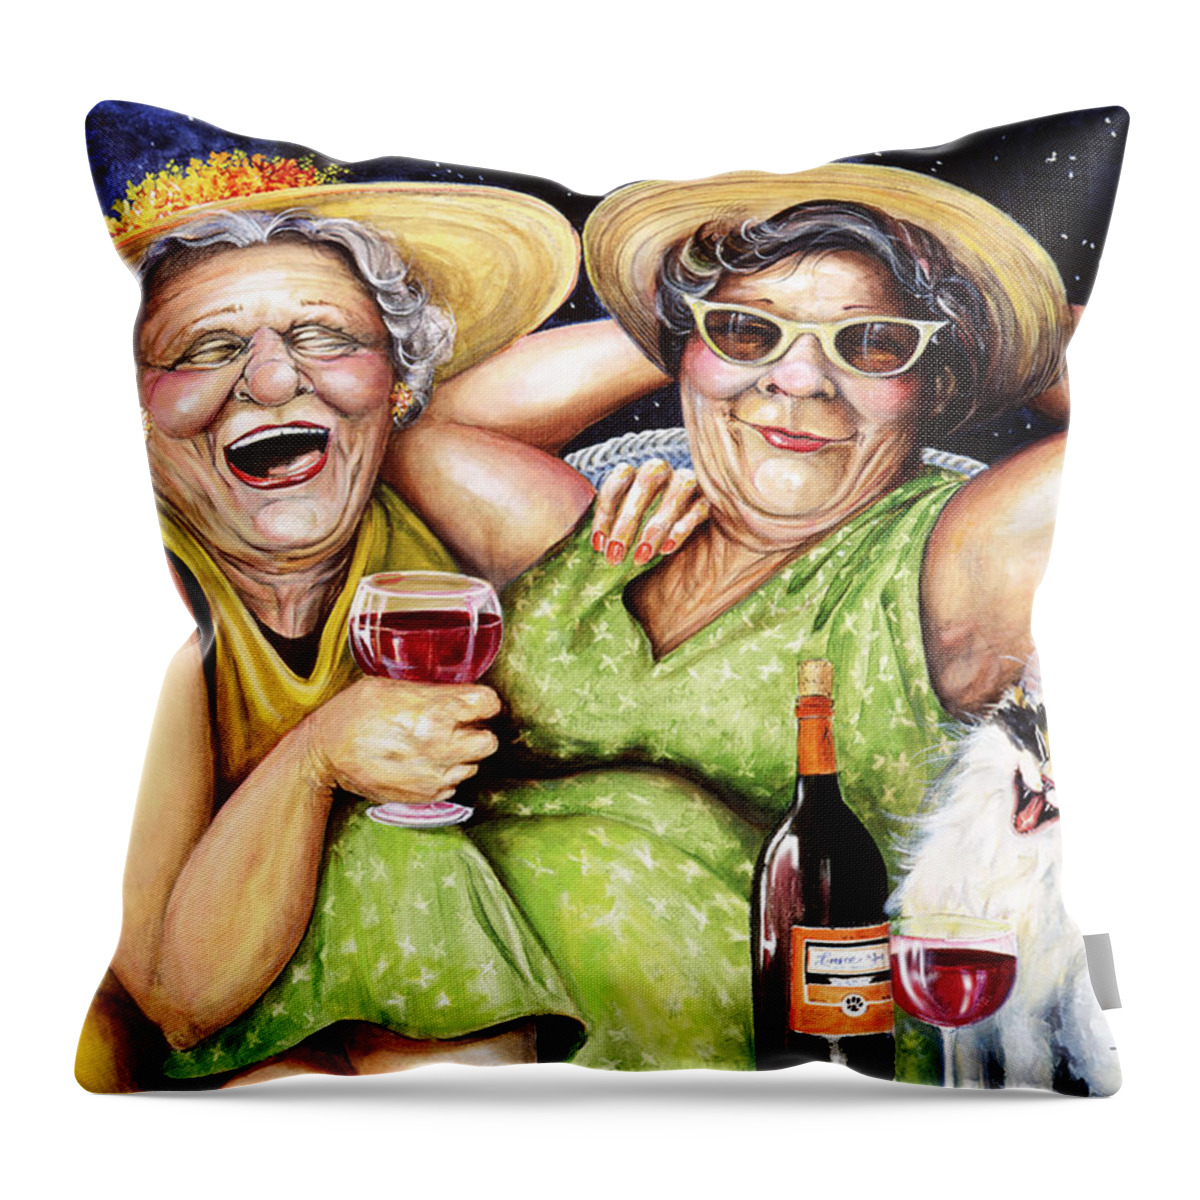 Whimsical Throw Pillow featuring the painting Bahama Mamas by Shelly Wilkerson